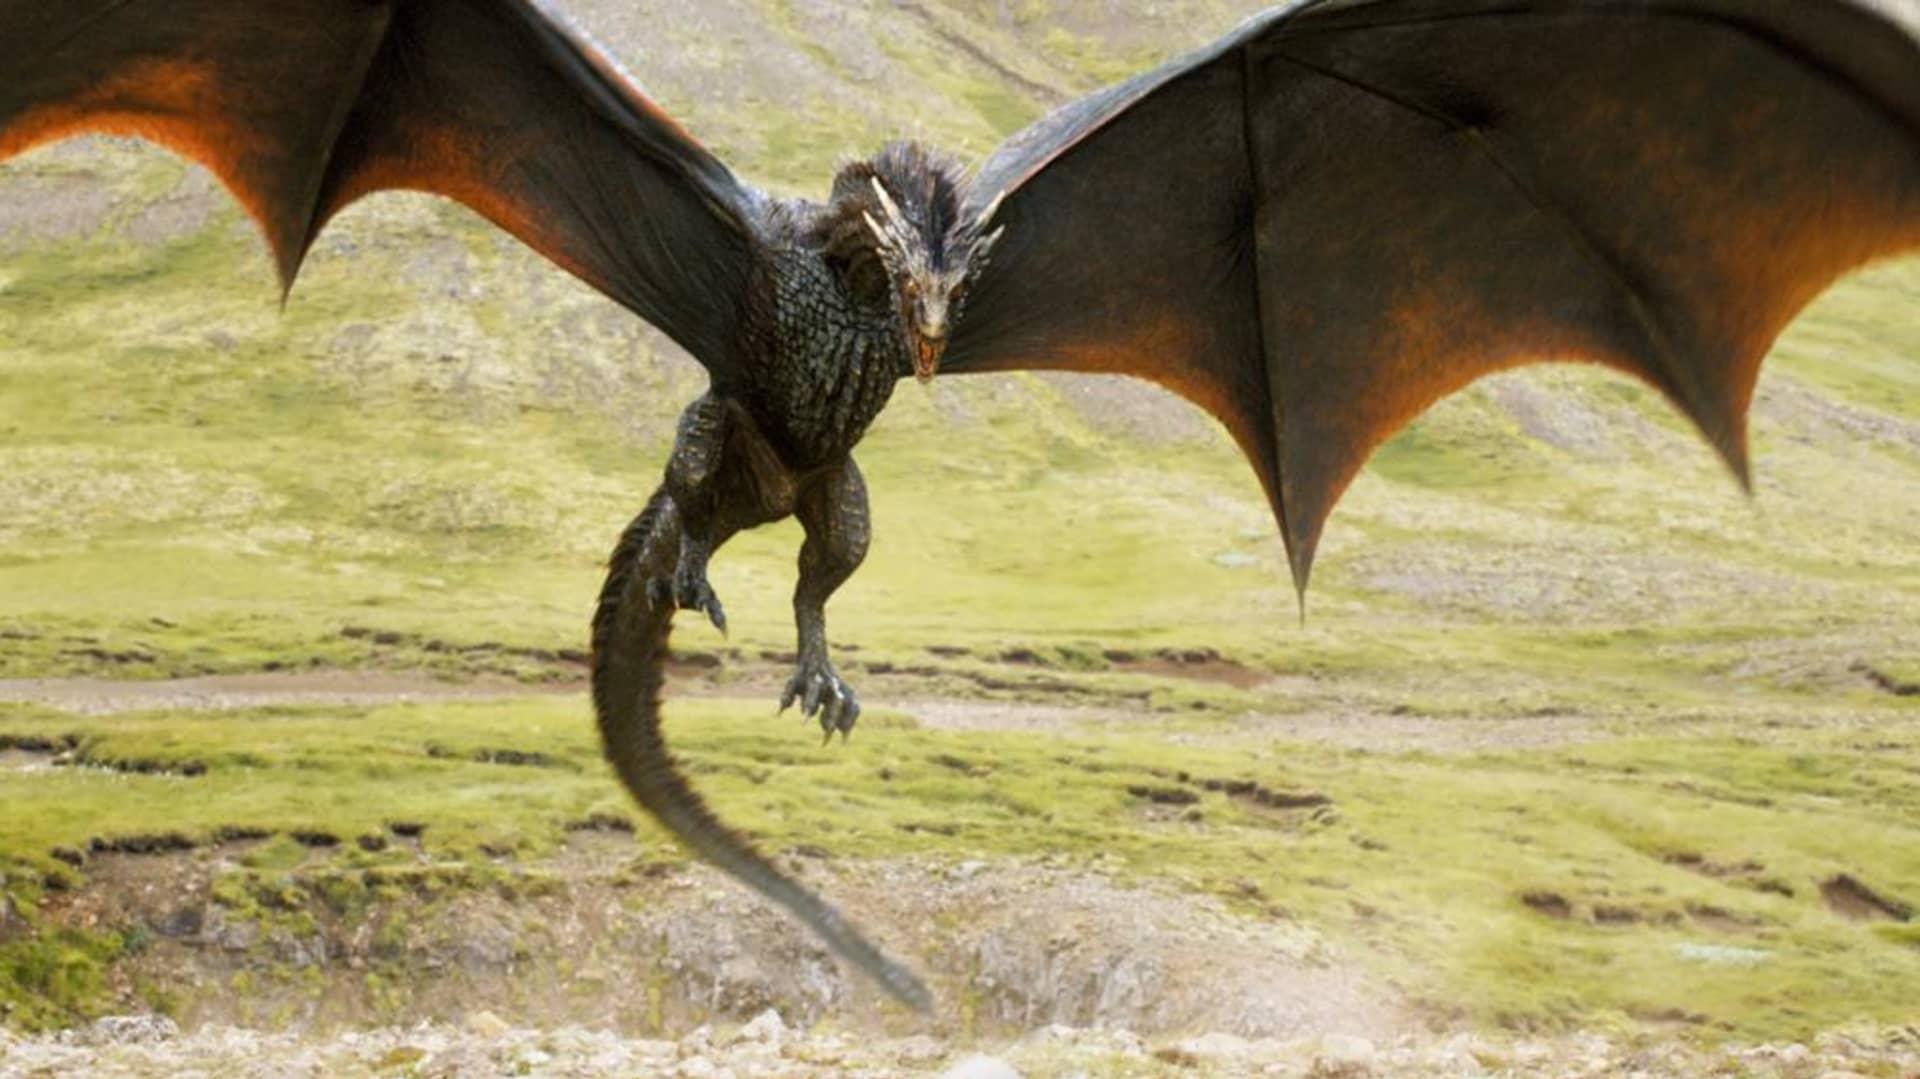 Could the Game of Thrones Dragons Fly and Breathe Fire